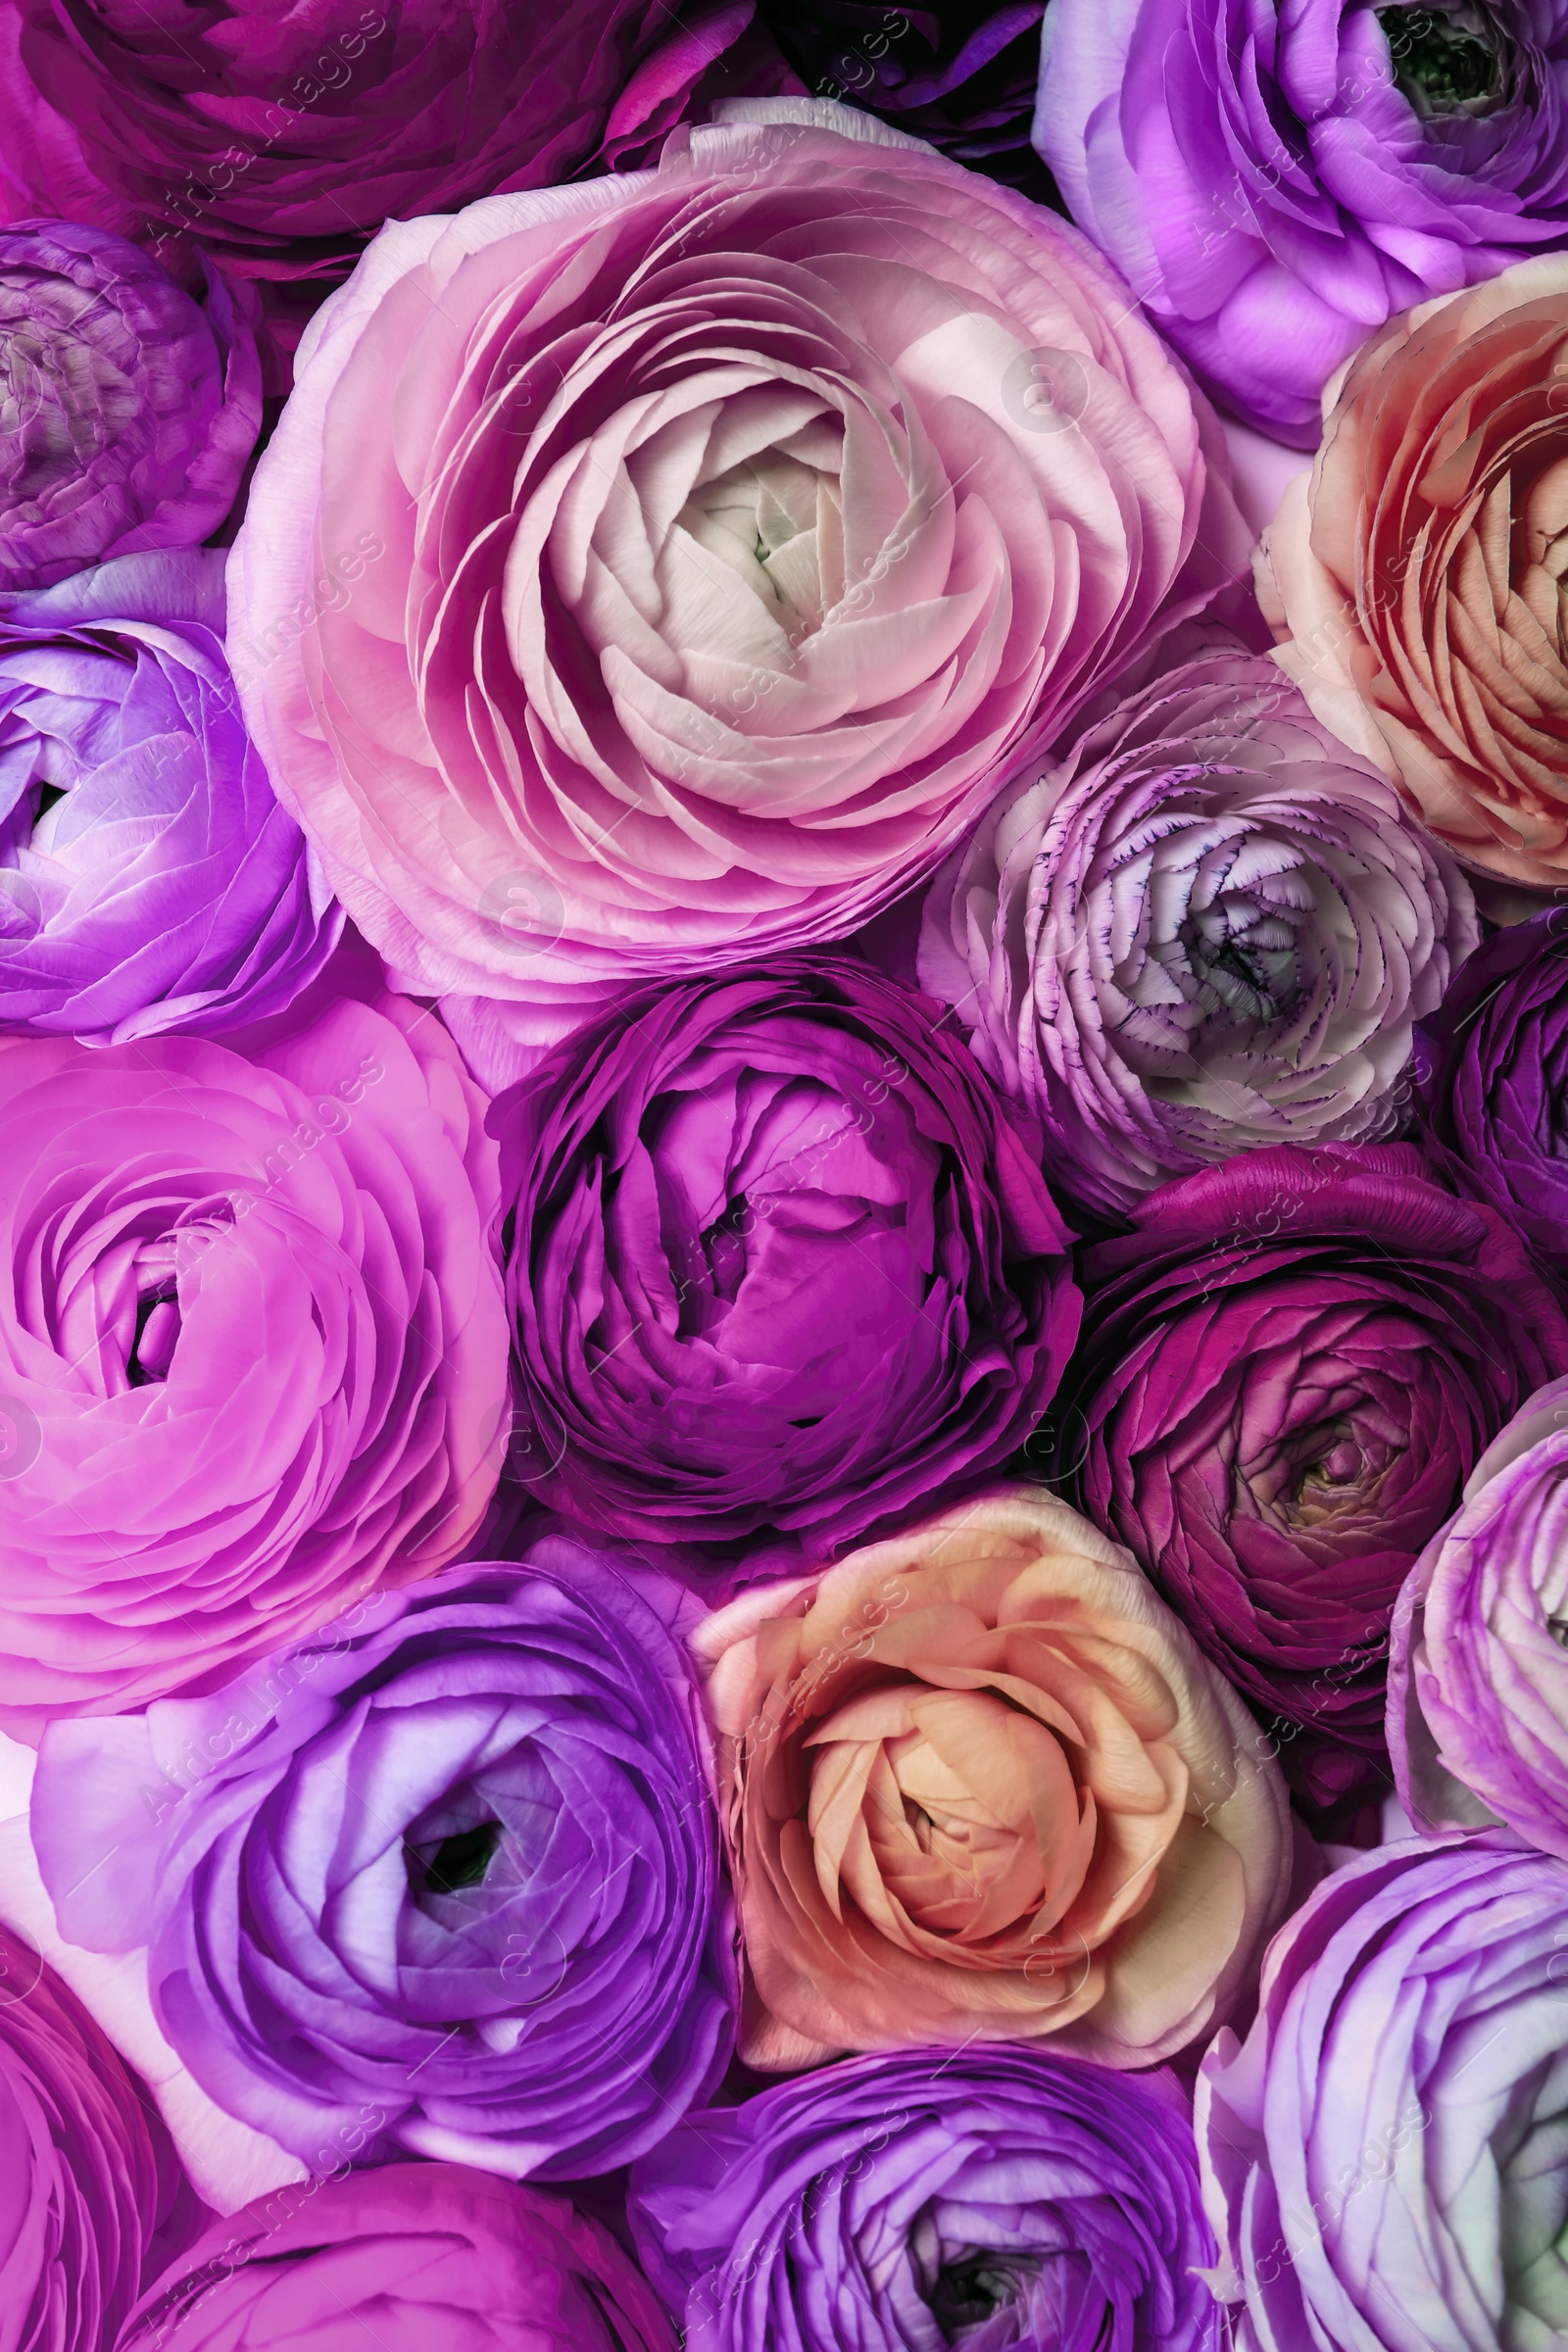 Image of Many different beautiful ranunculus flowers, closeup view